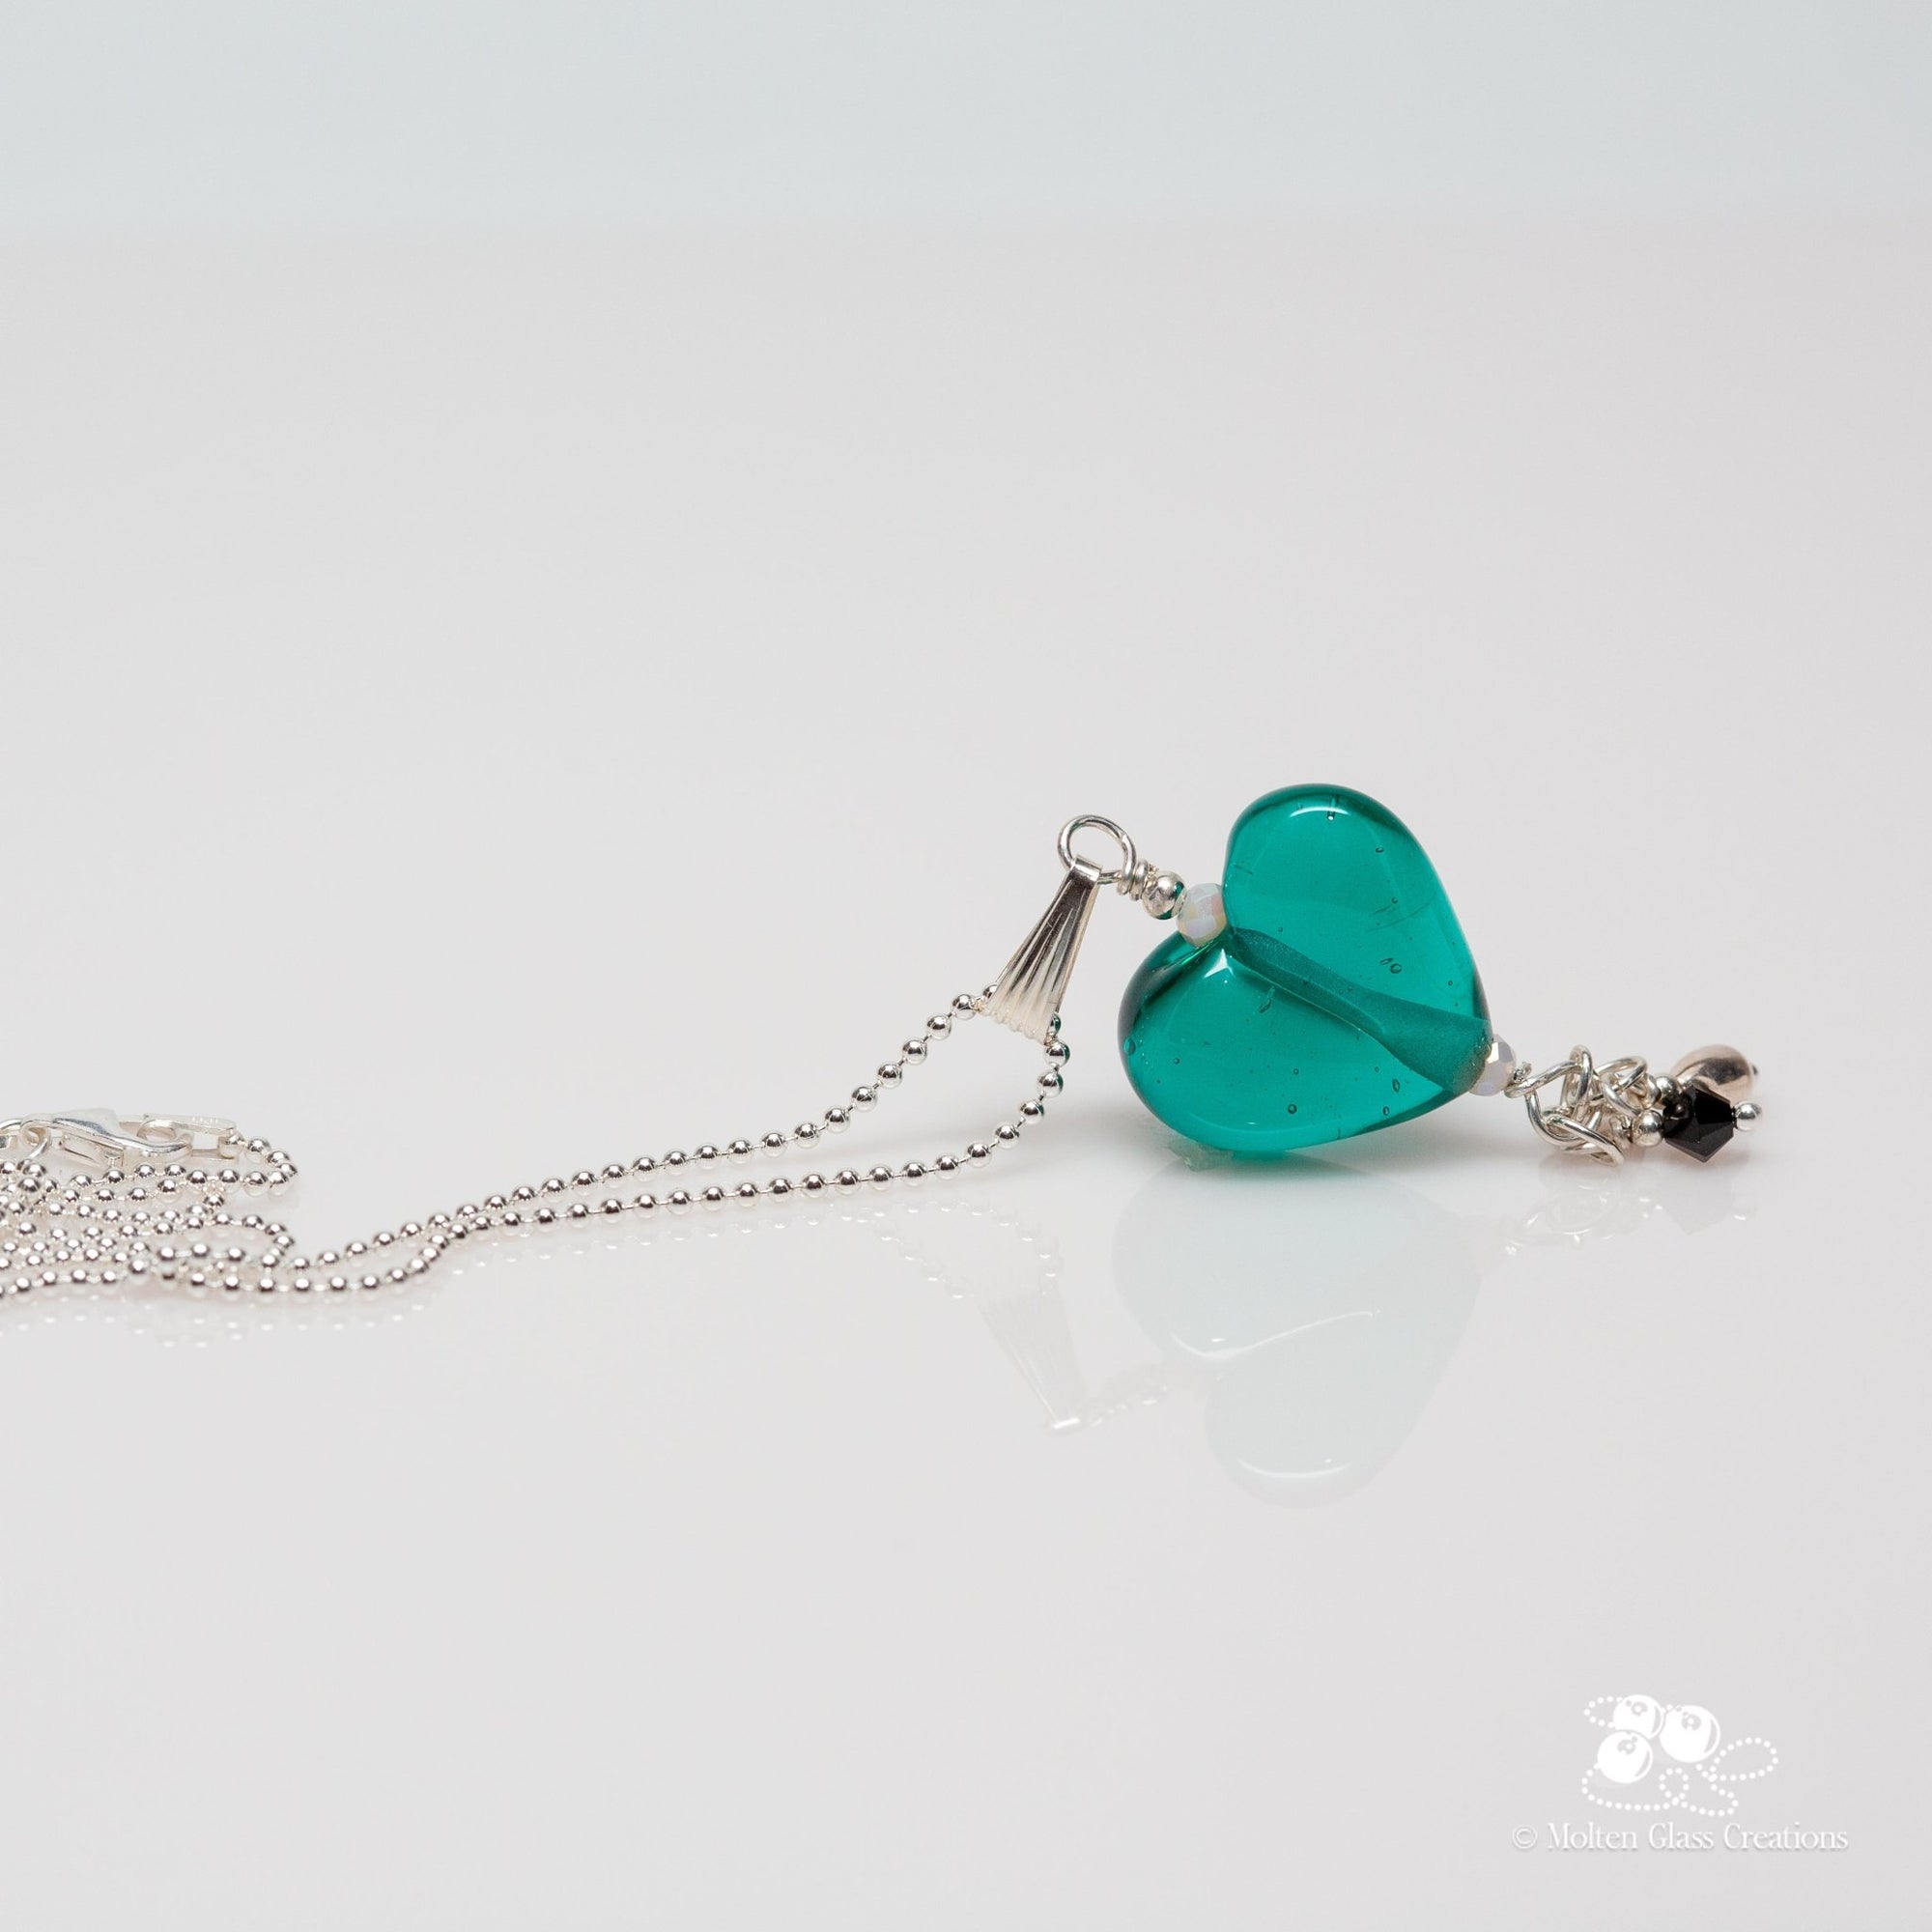 Elegant Teal Glass Heart Necklace - Molten Glass Creations